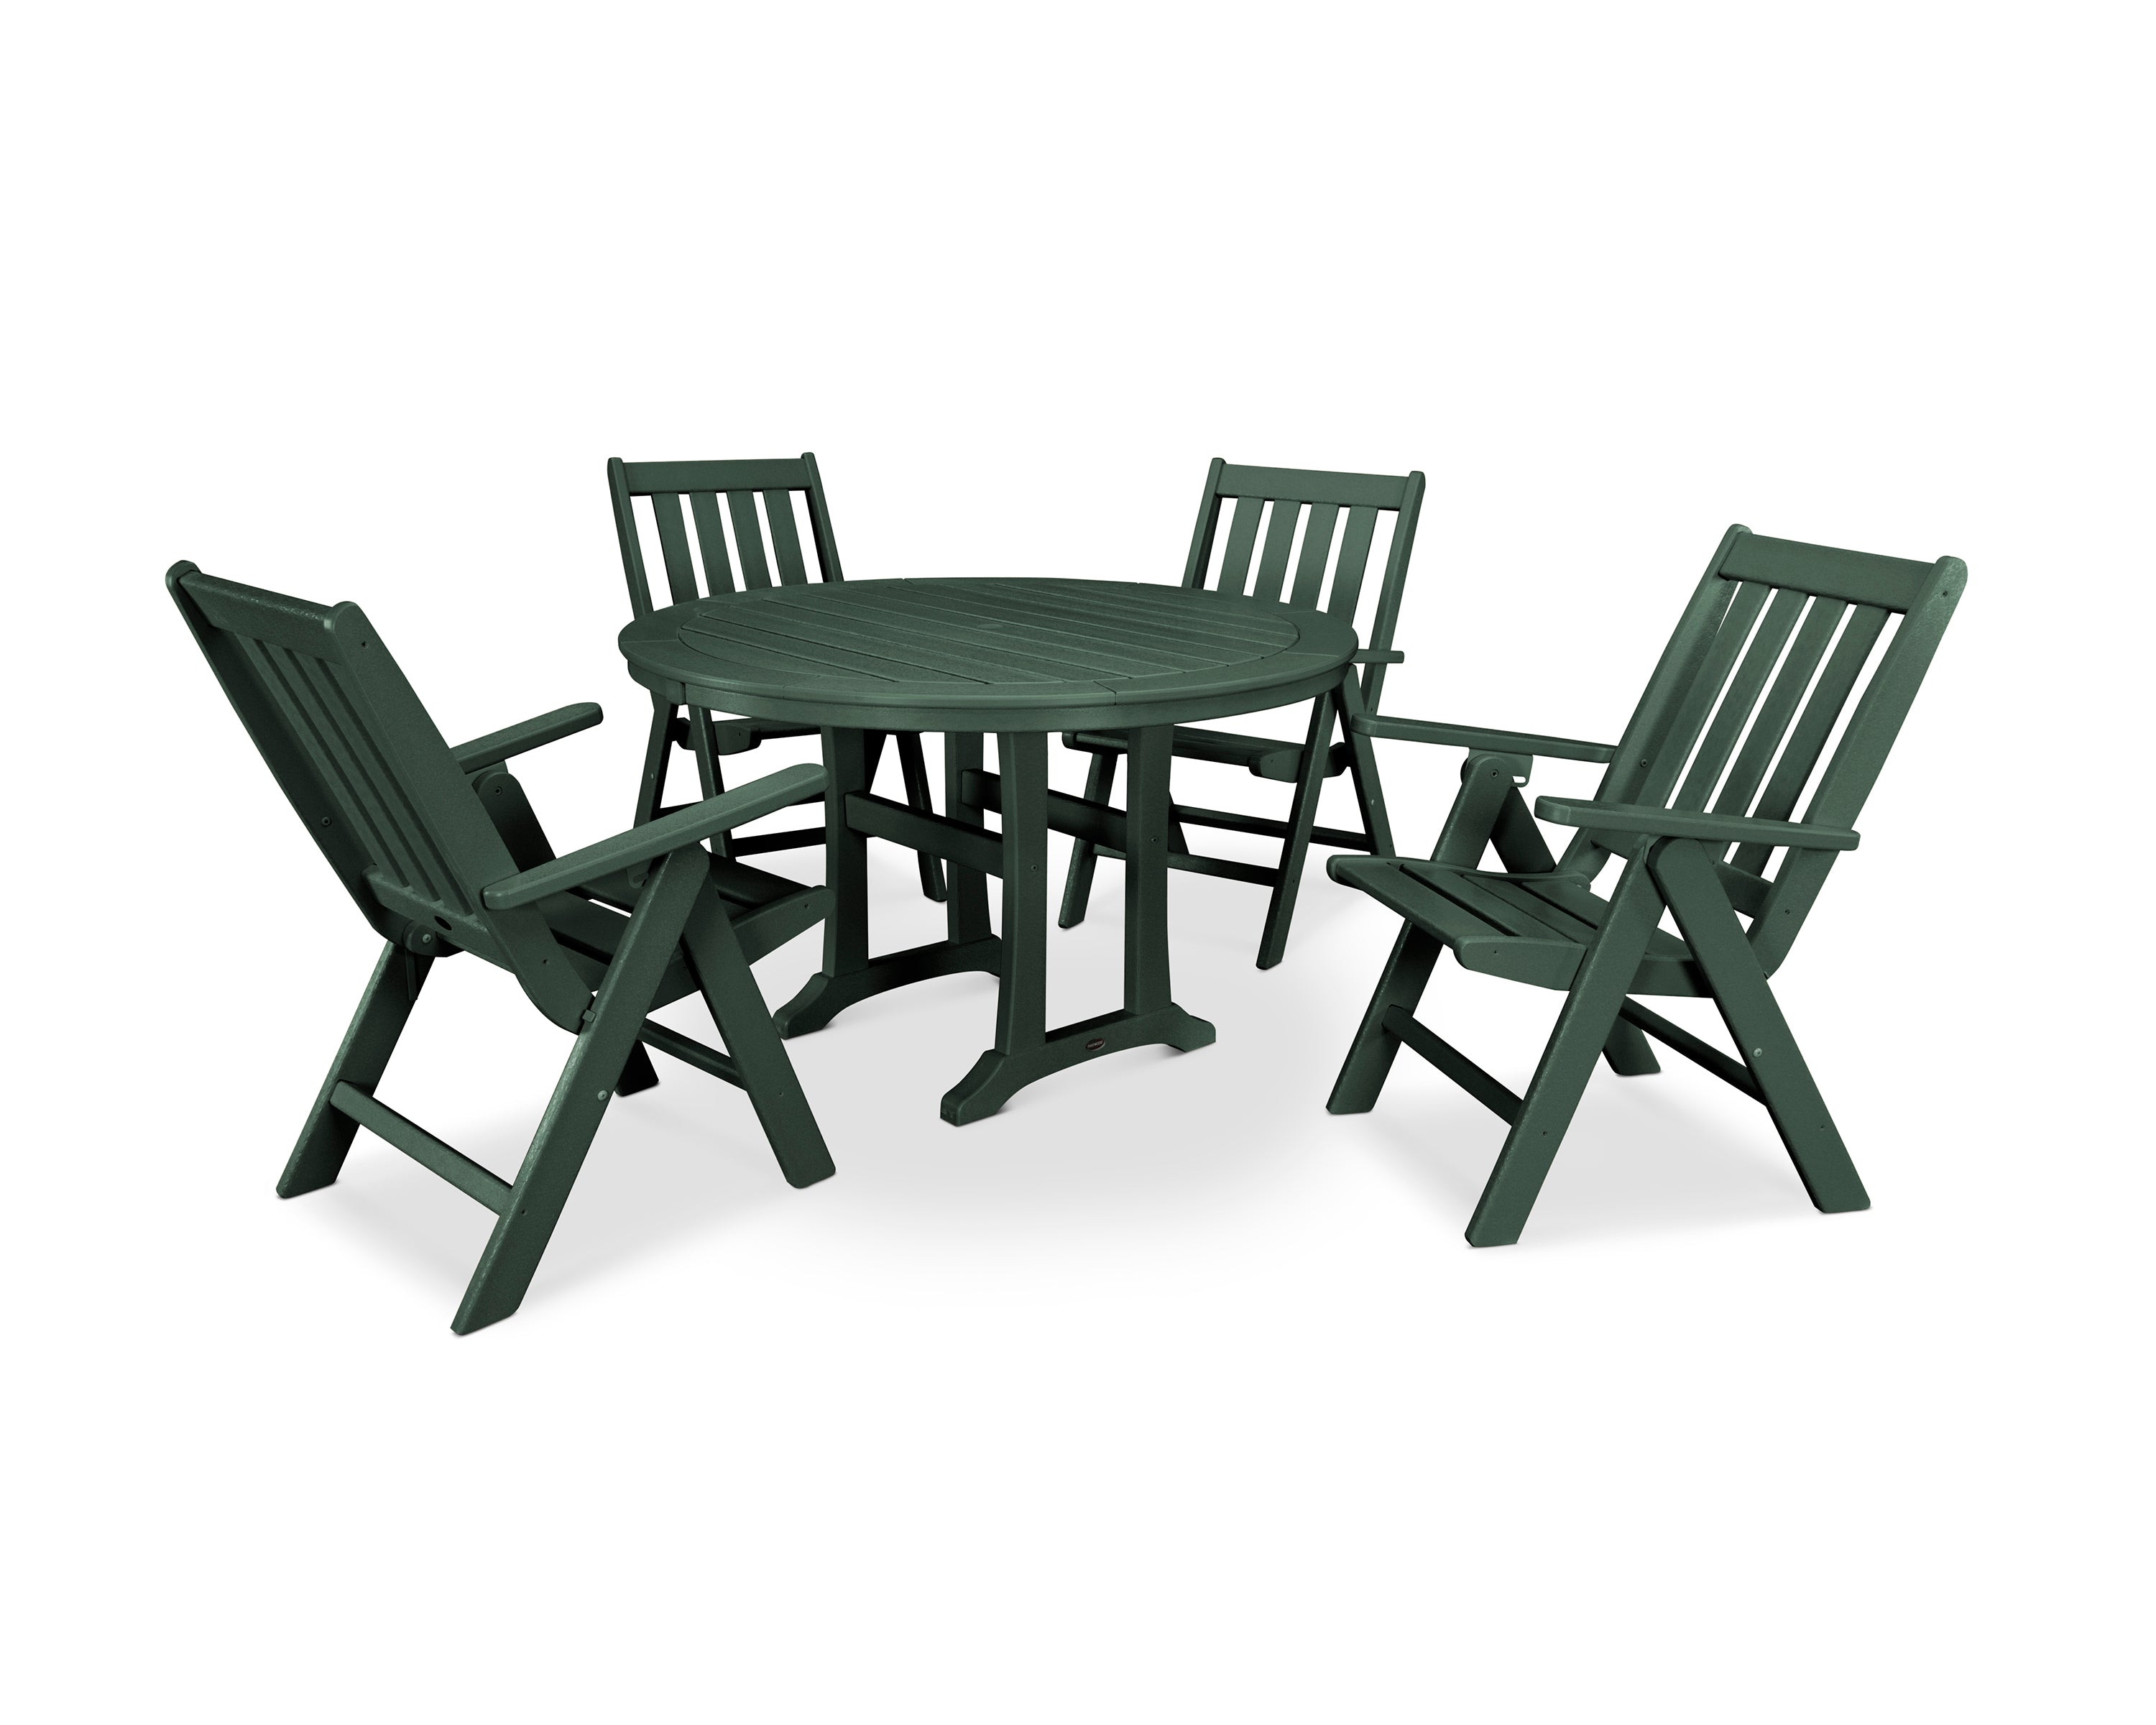 POLYWOOD® Vineyard Folding Chair 5-Piece Round Dining Set with Trestle Legs in Green